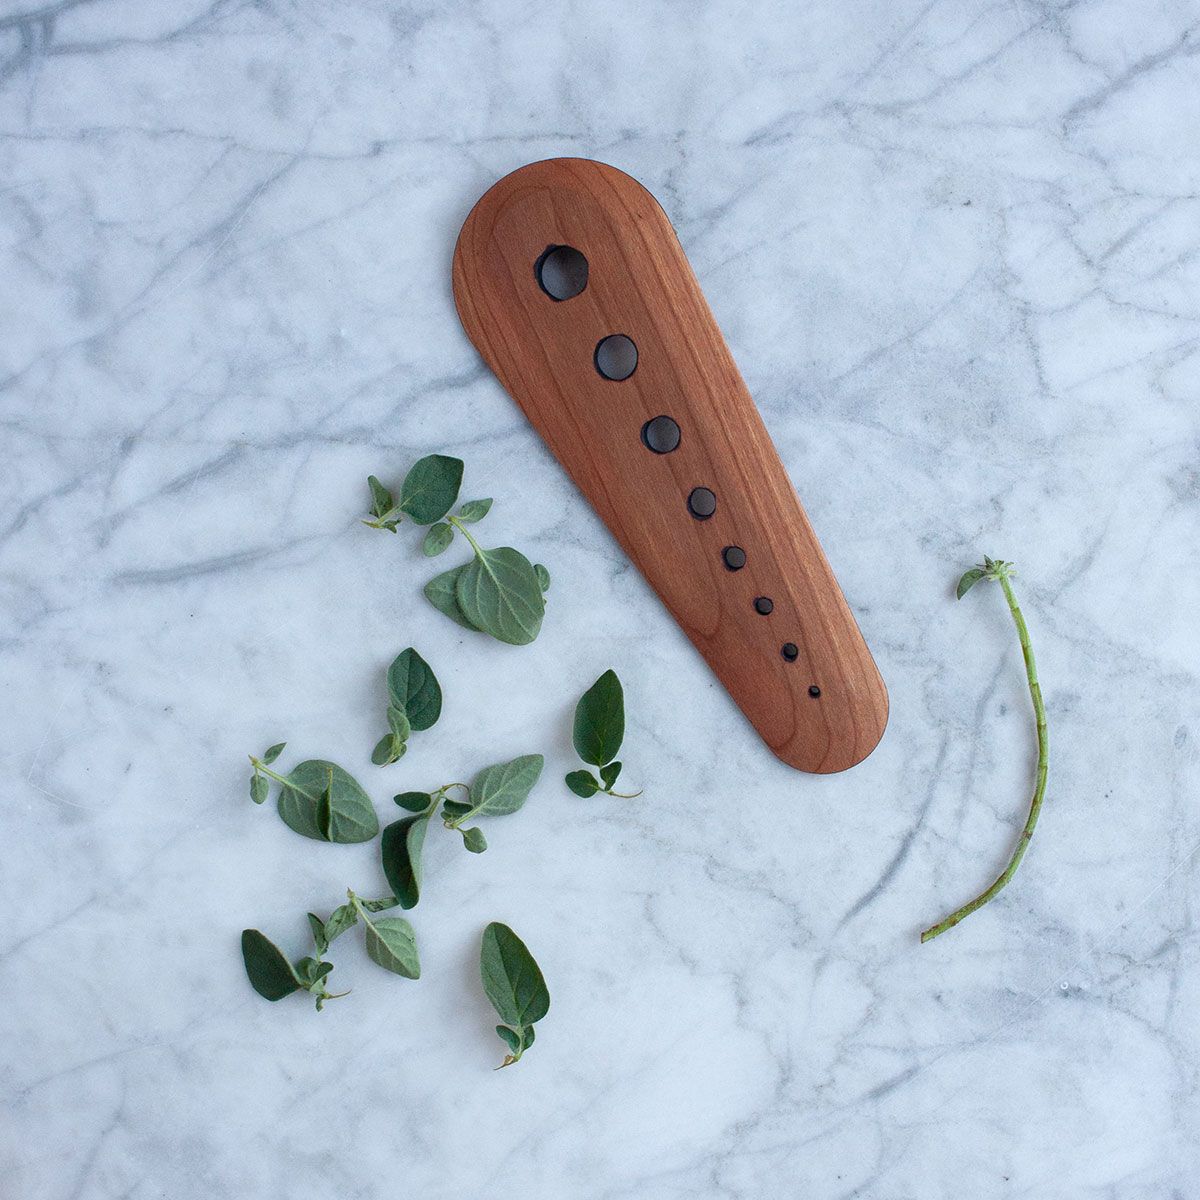 Cherry herb stripper sitting on a marble table top is surrounded by de-stemmed oregano and a leafless stem.